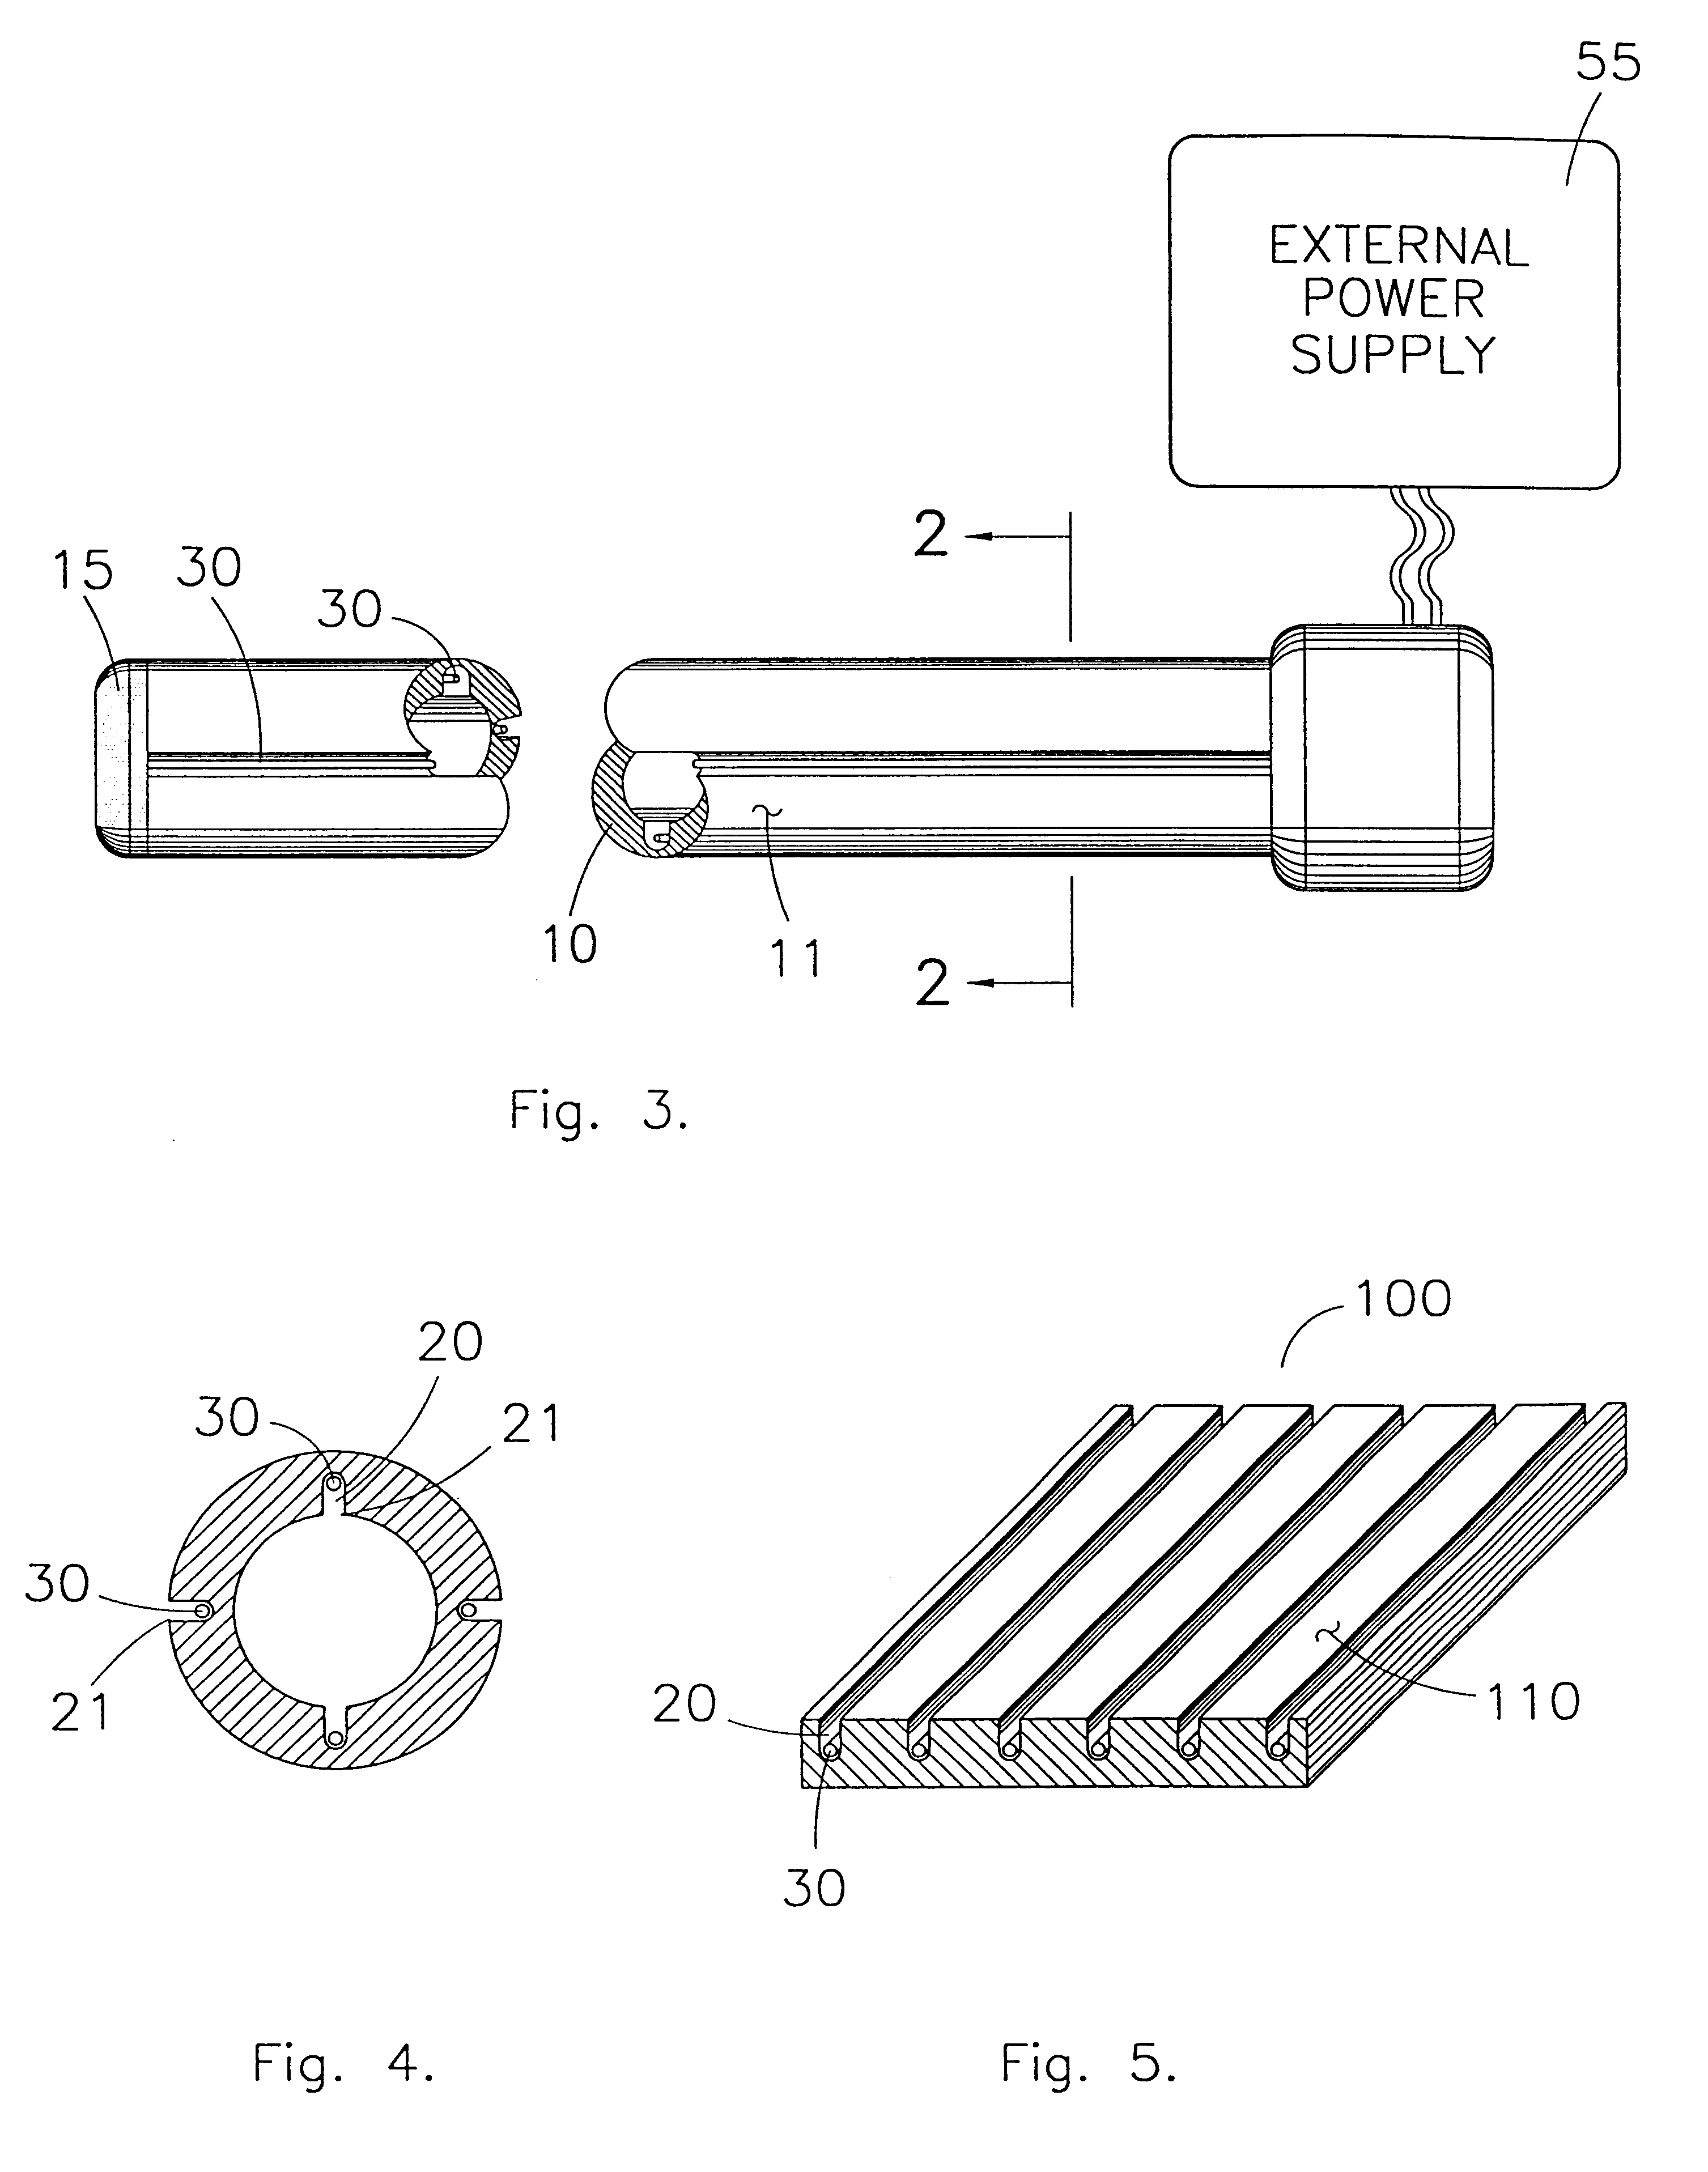 Electrode system in iontophoretic treatment devices